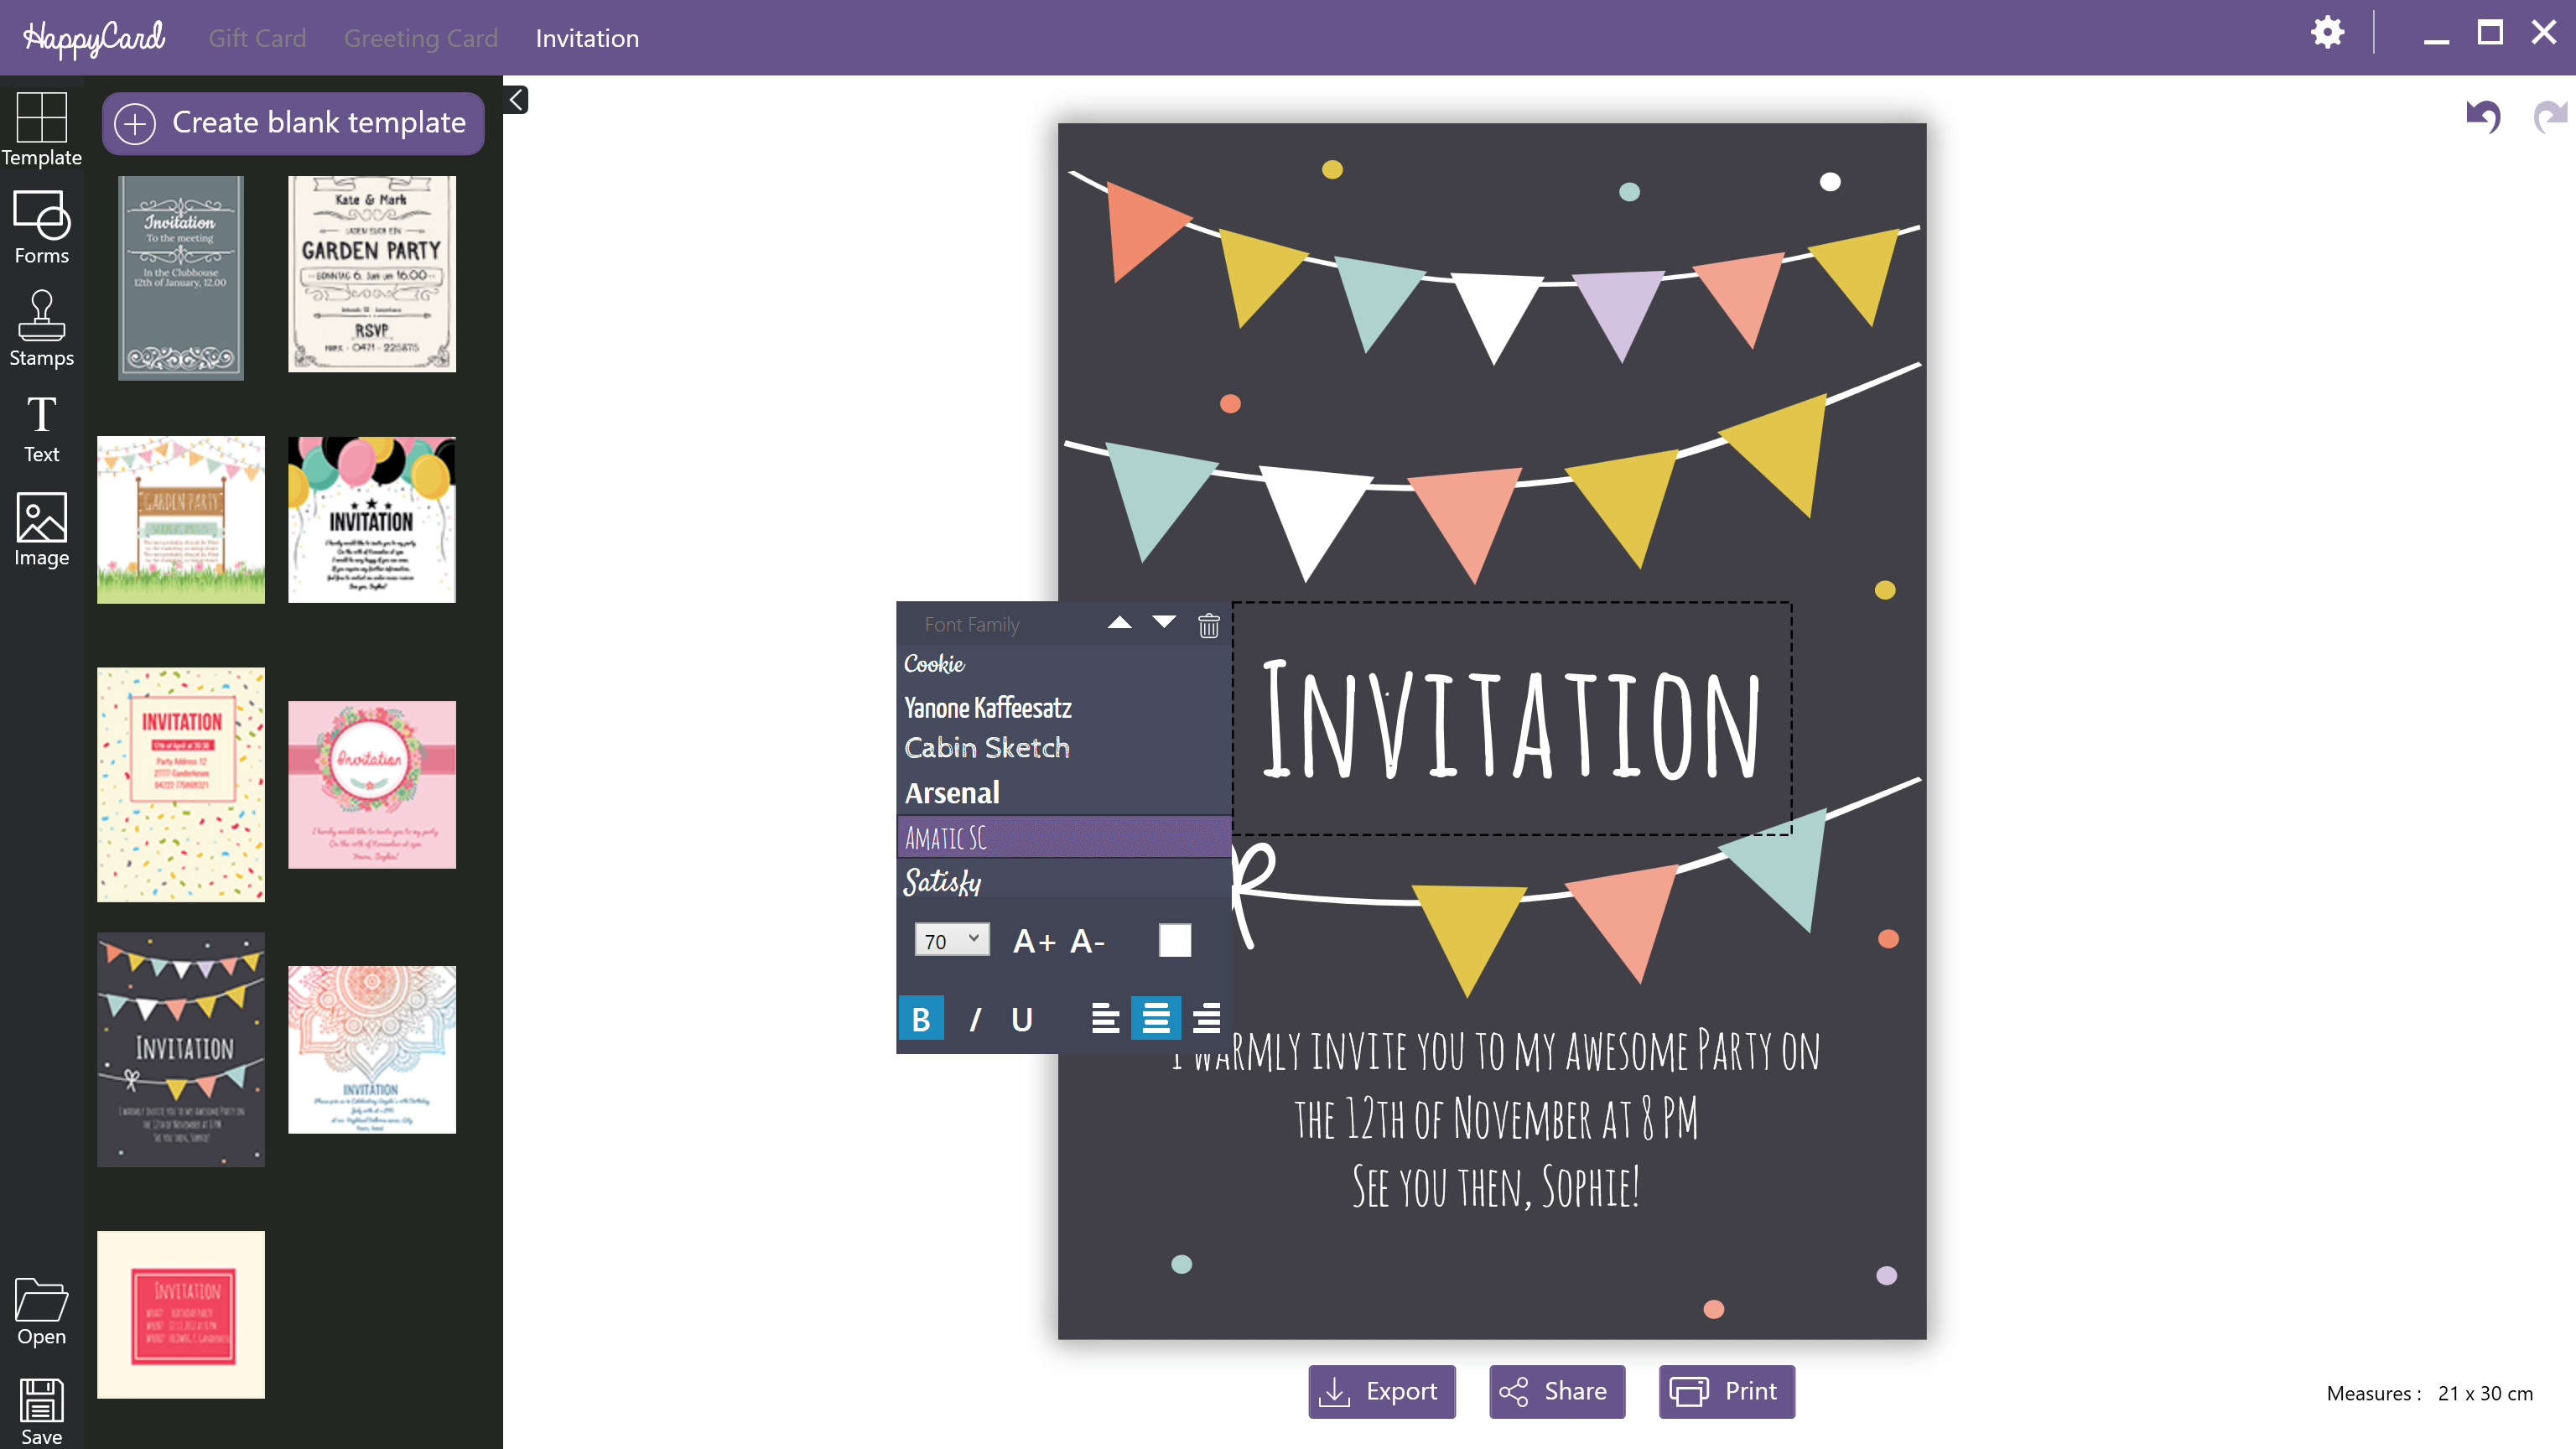 Choose whether you want to create a gift card, a greeting card or an invitation. 